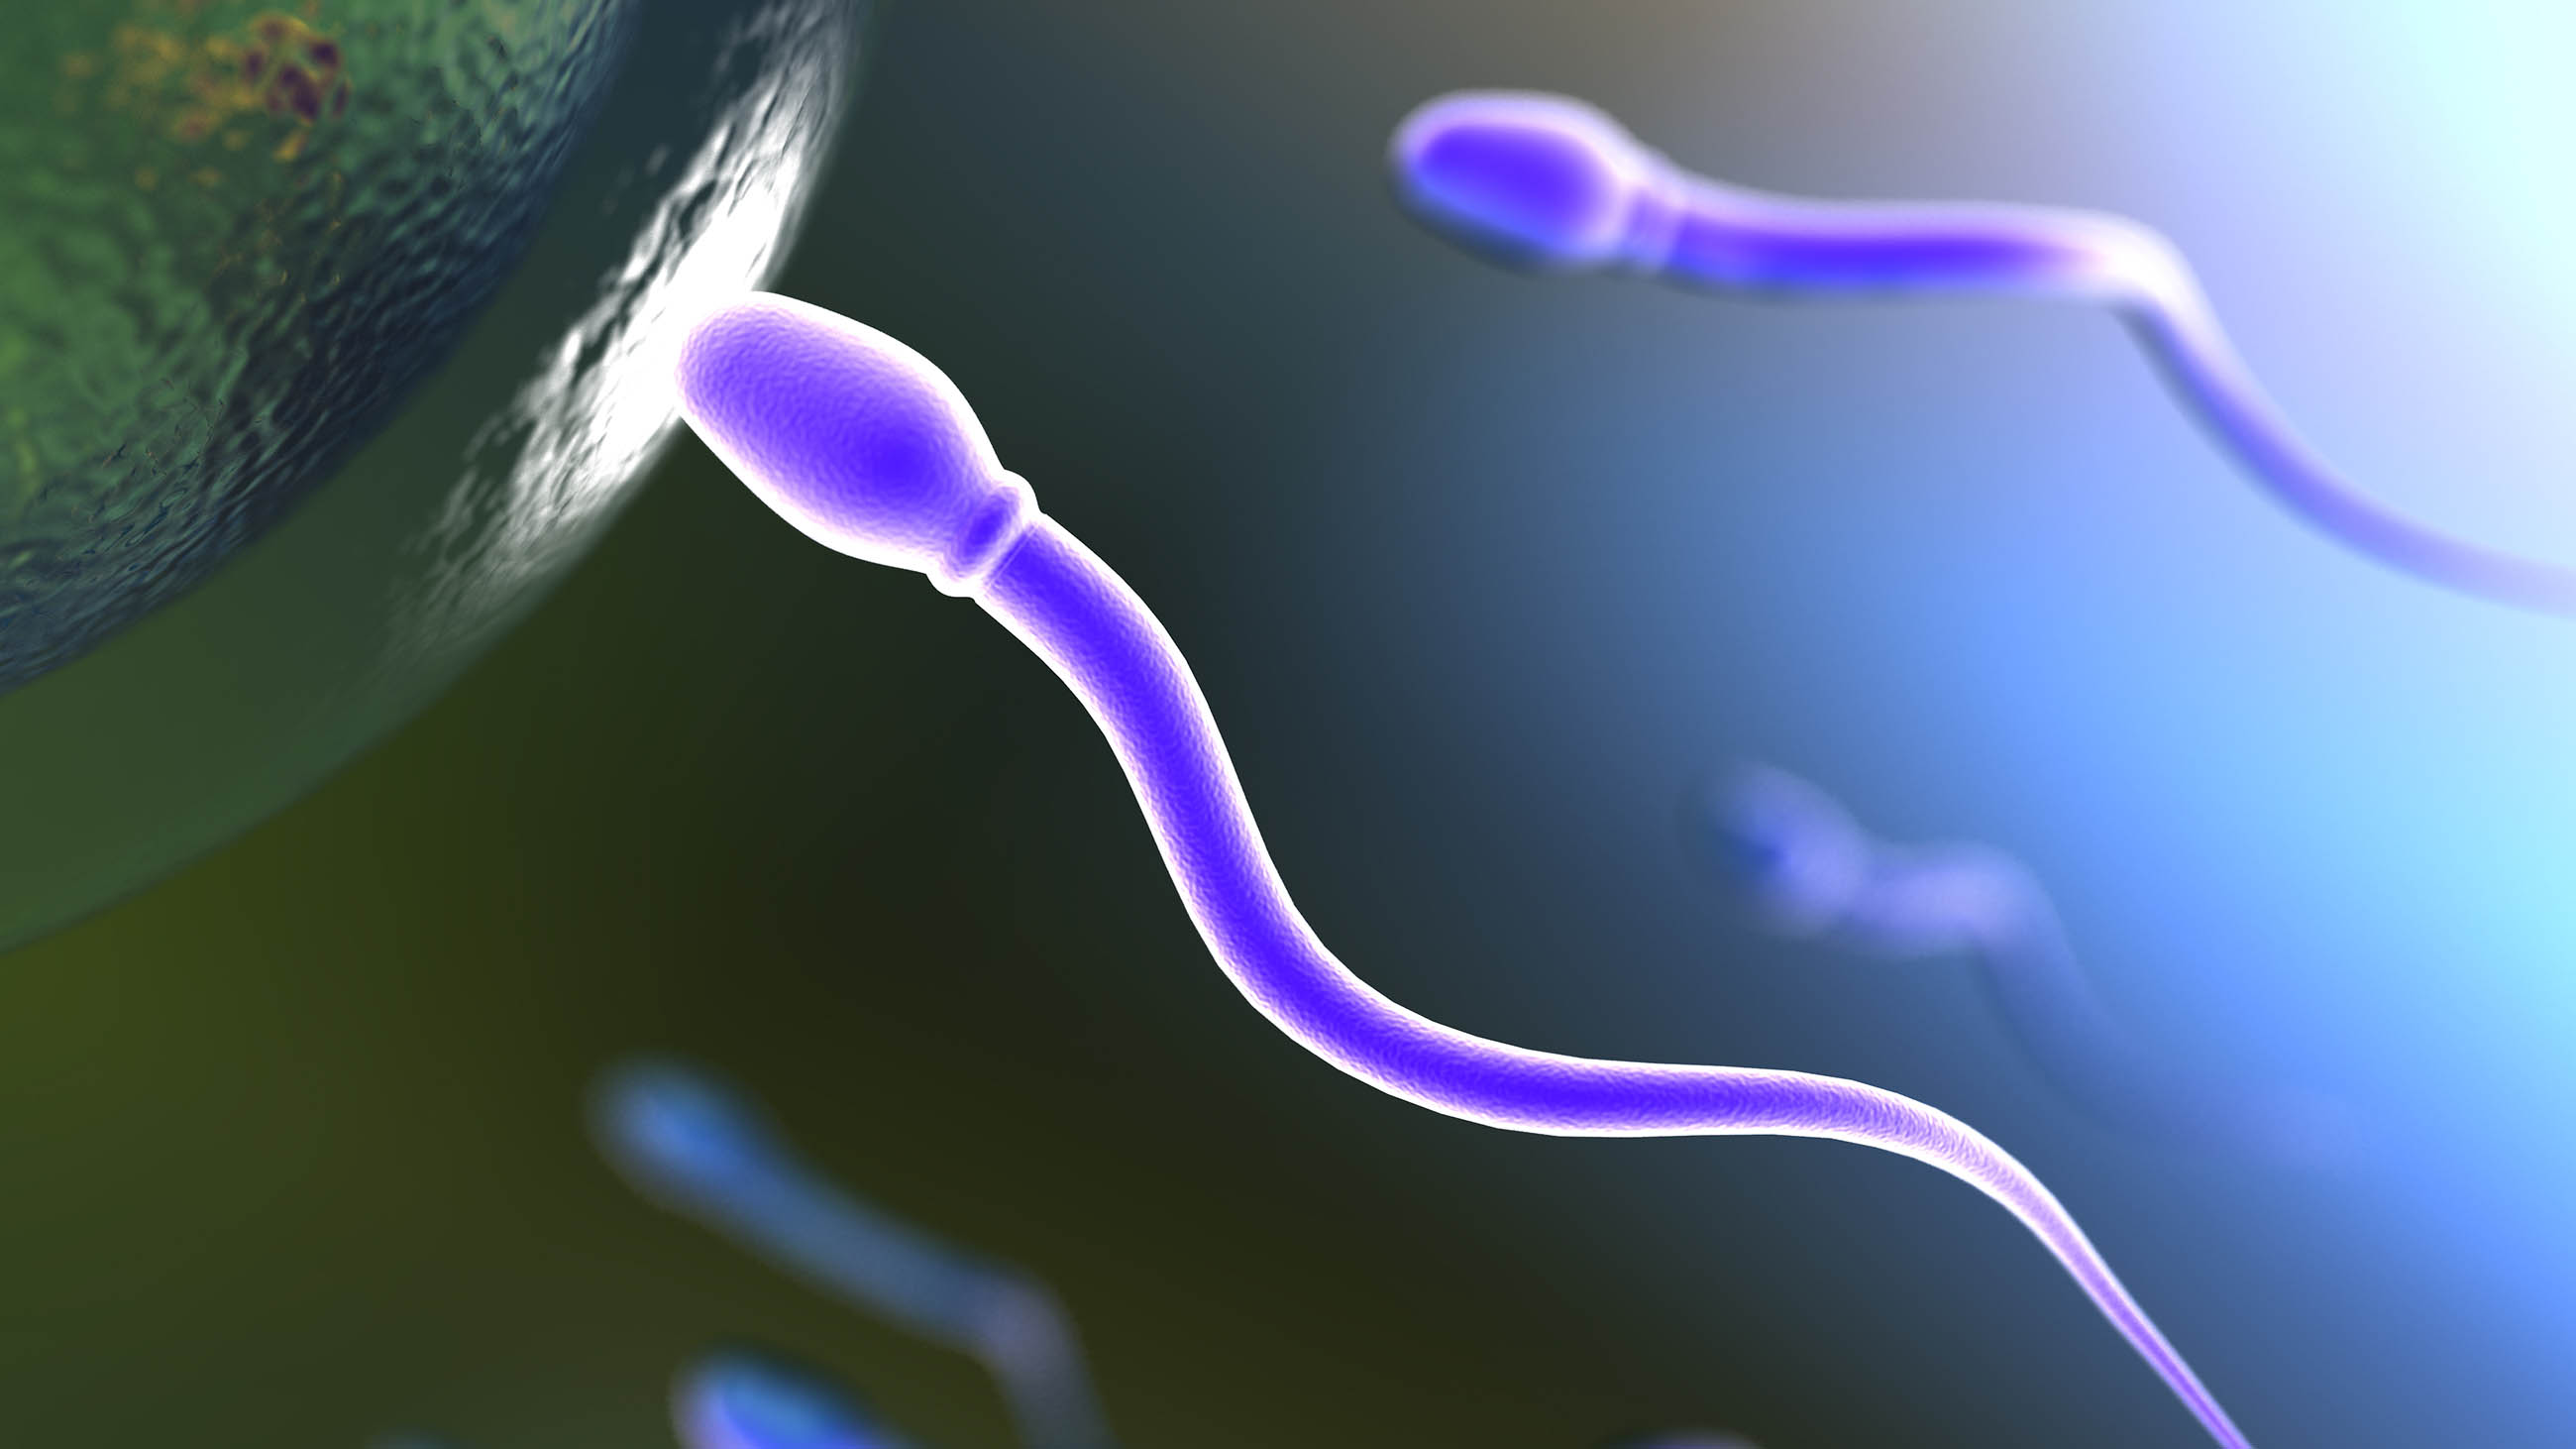 Not until 1875 did a German scientist finally put the sperm and the egg together conceptually.